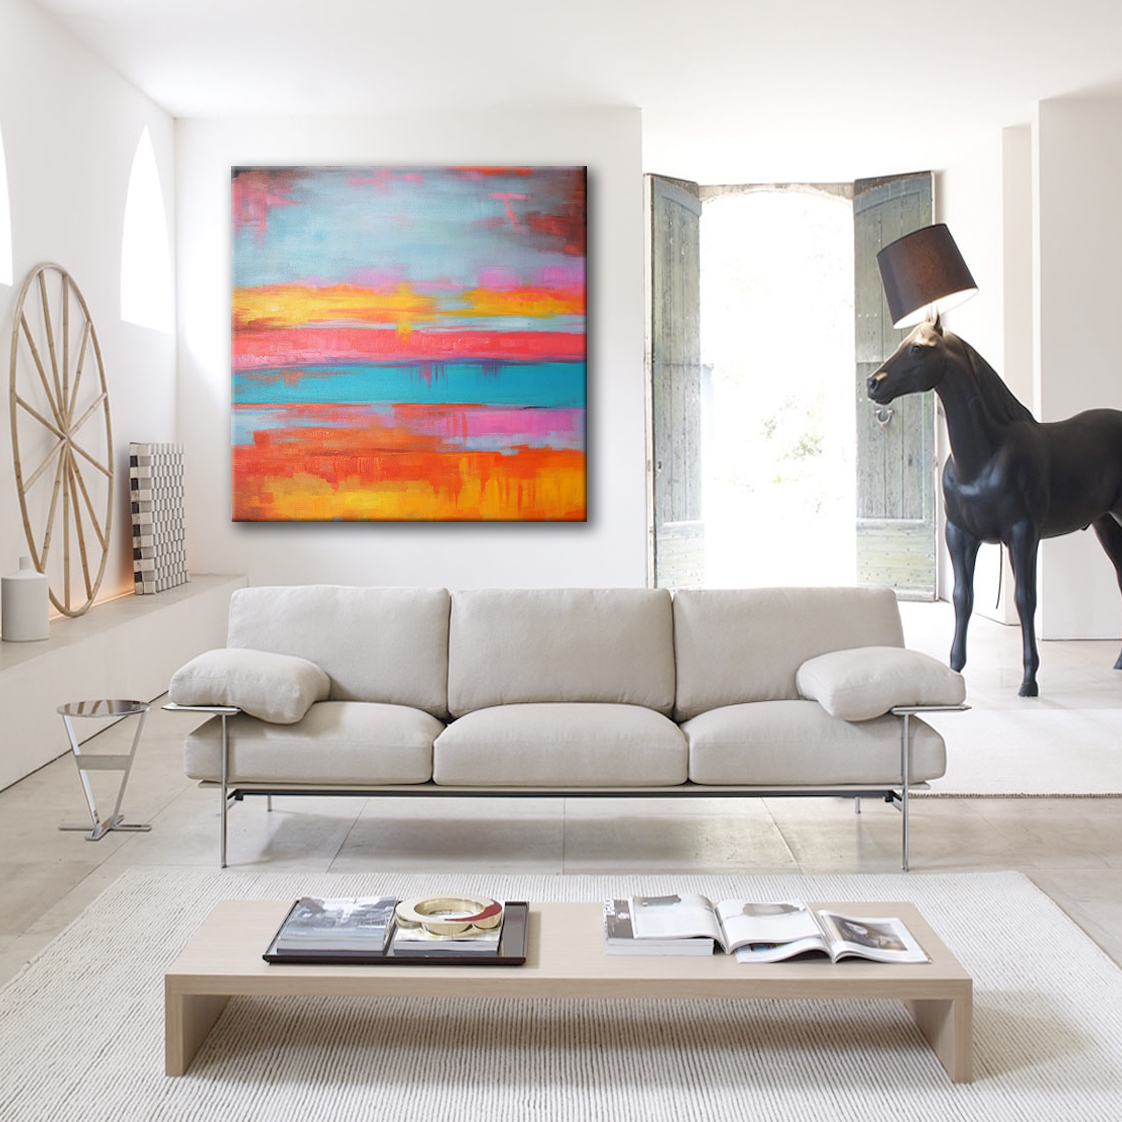 Art Driven Interiors: When Your Home Becomes A Canvas